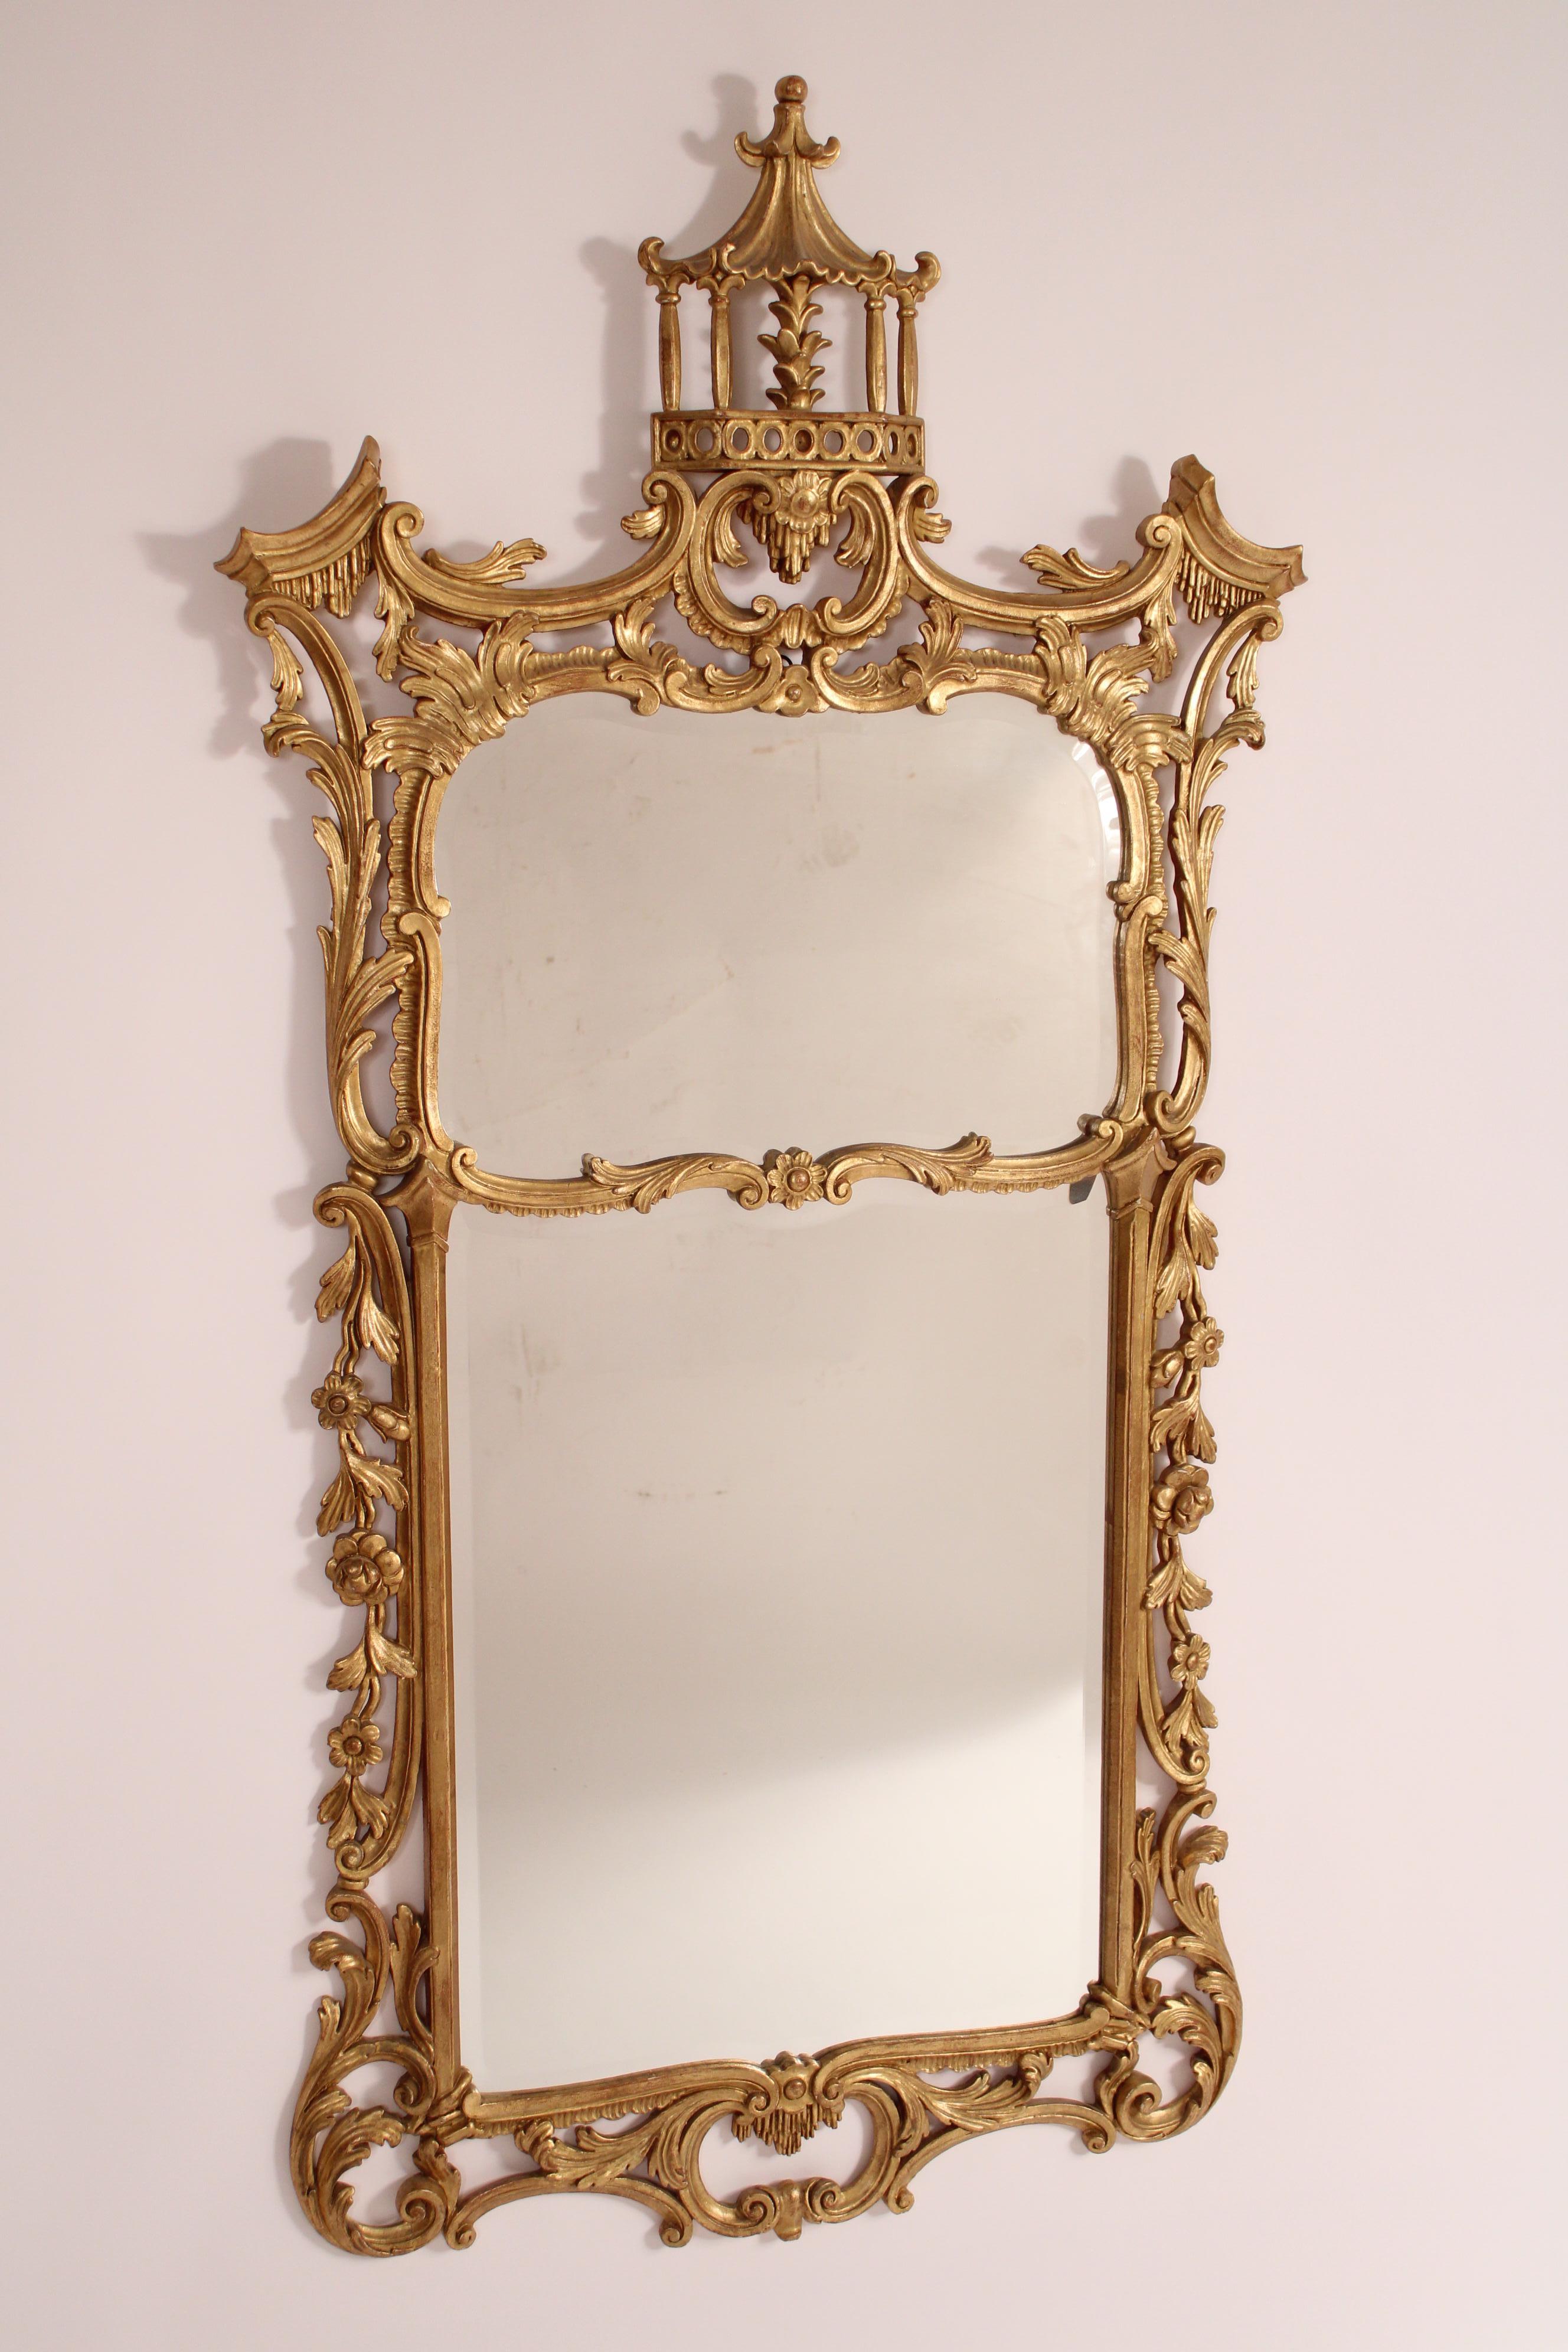 George II style gilt wood (Dutch Gold) mirror, made in Italy, circa 1970's. With a pagoda top, carved floral sides and rococo bottom, with beveled glass mirror.